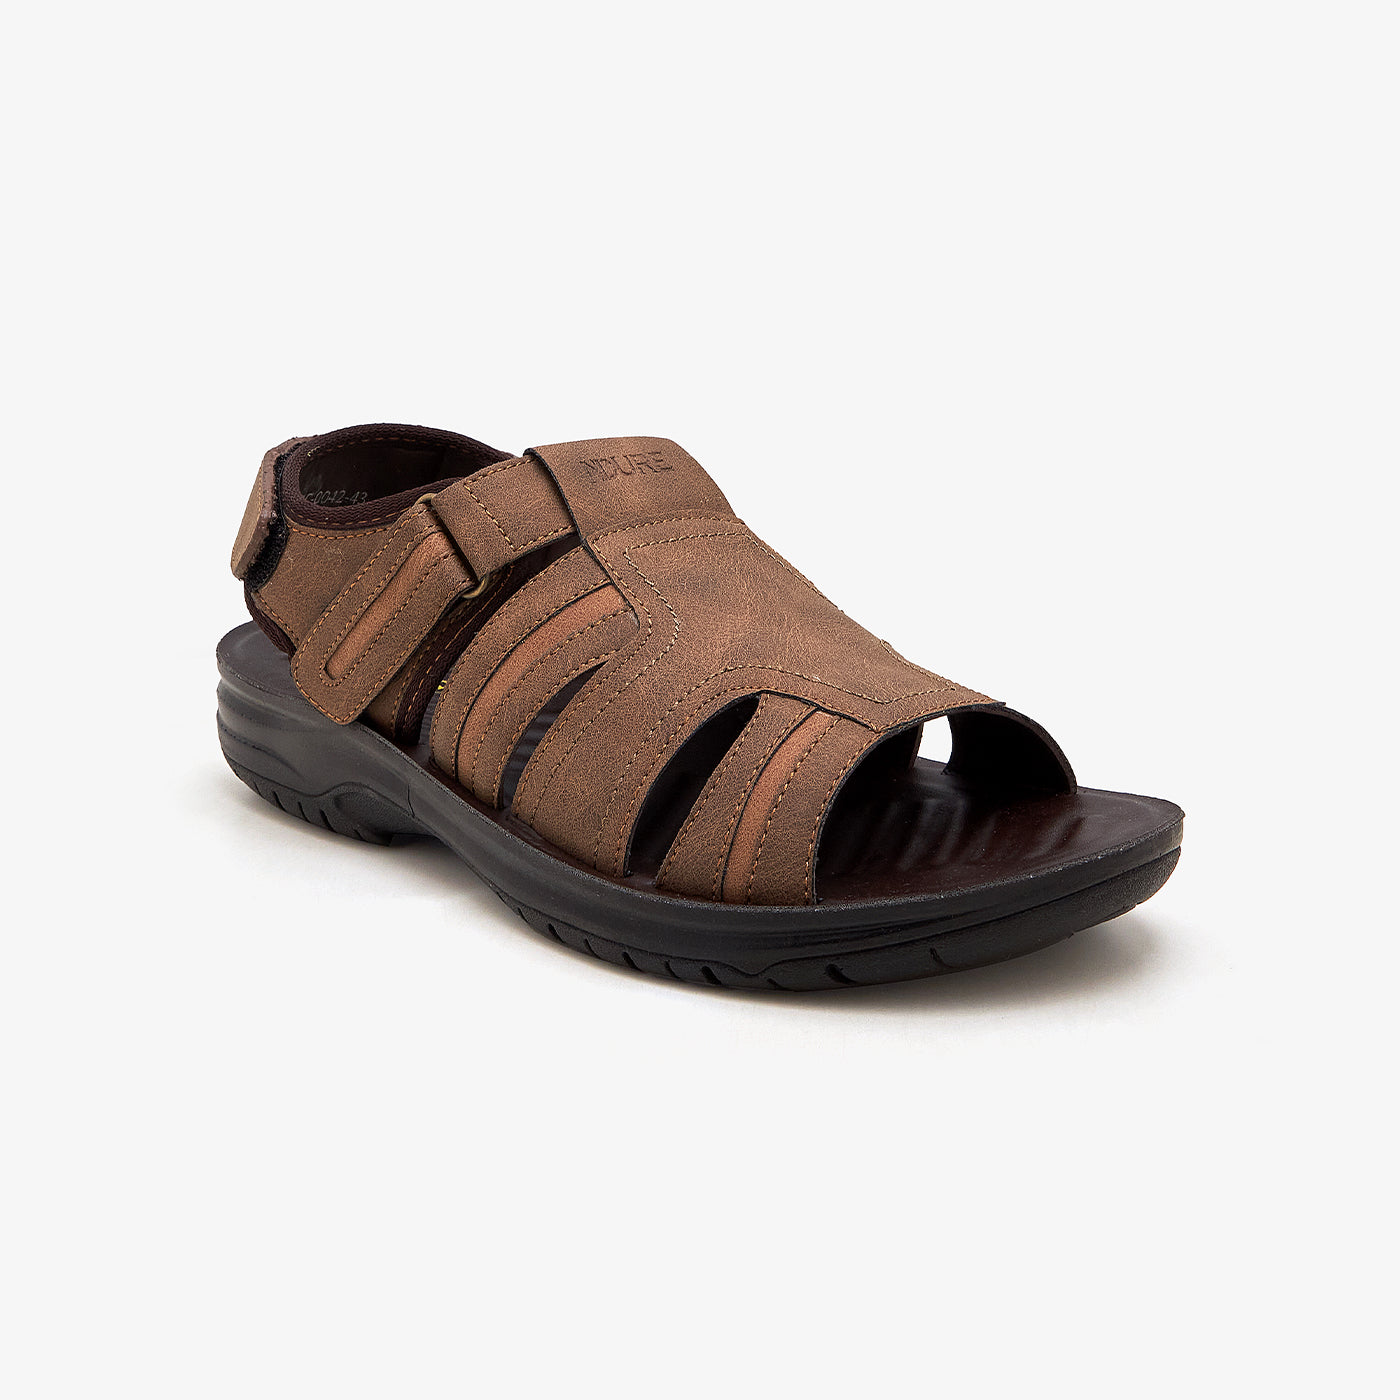 Stylish Unisex Mens Leather Sandals Amazon Black/Brown Perfect For Sandy  Beach Sizes Eur 38 44 Code: 92 1766991 From Shoes_4_you, $10.8 | DHgate.Com